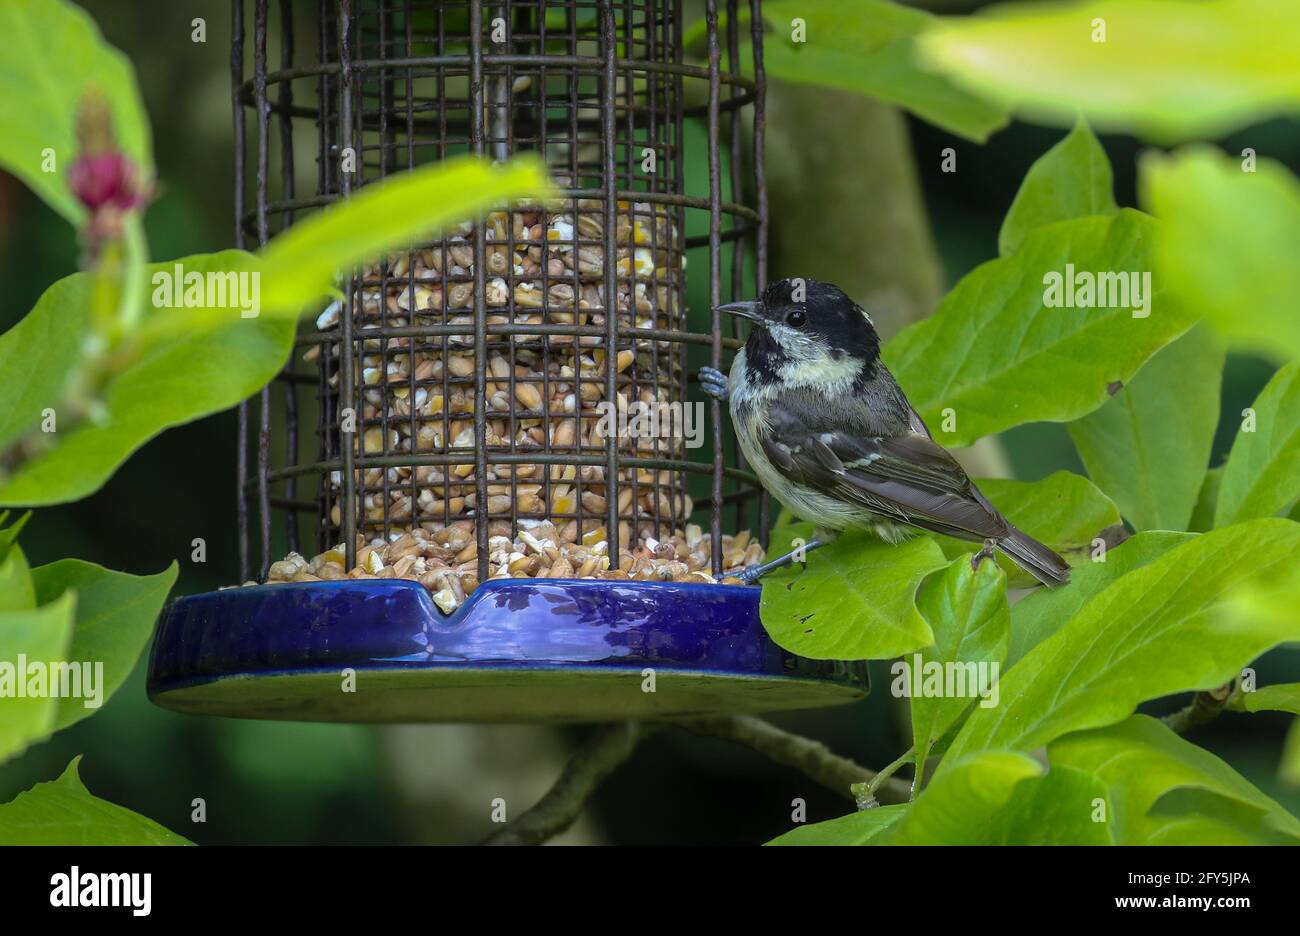 Small Coal tit bird "Periparus ater" on bird feeder with seed for food during Spring in Ireland. Surrounded by fresh green leaves Stock Photo